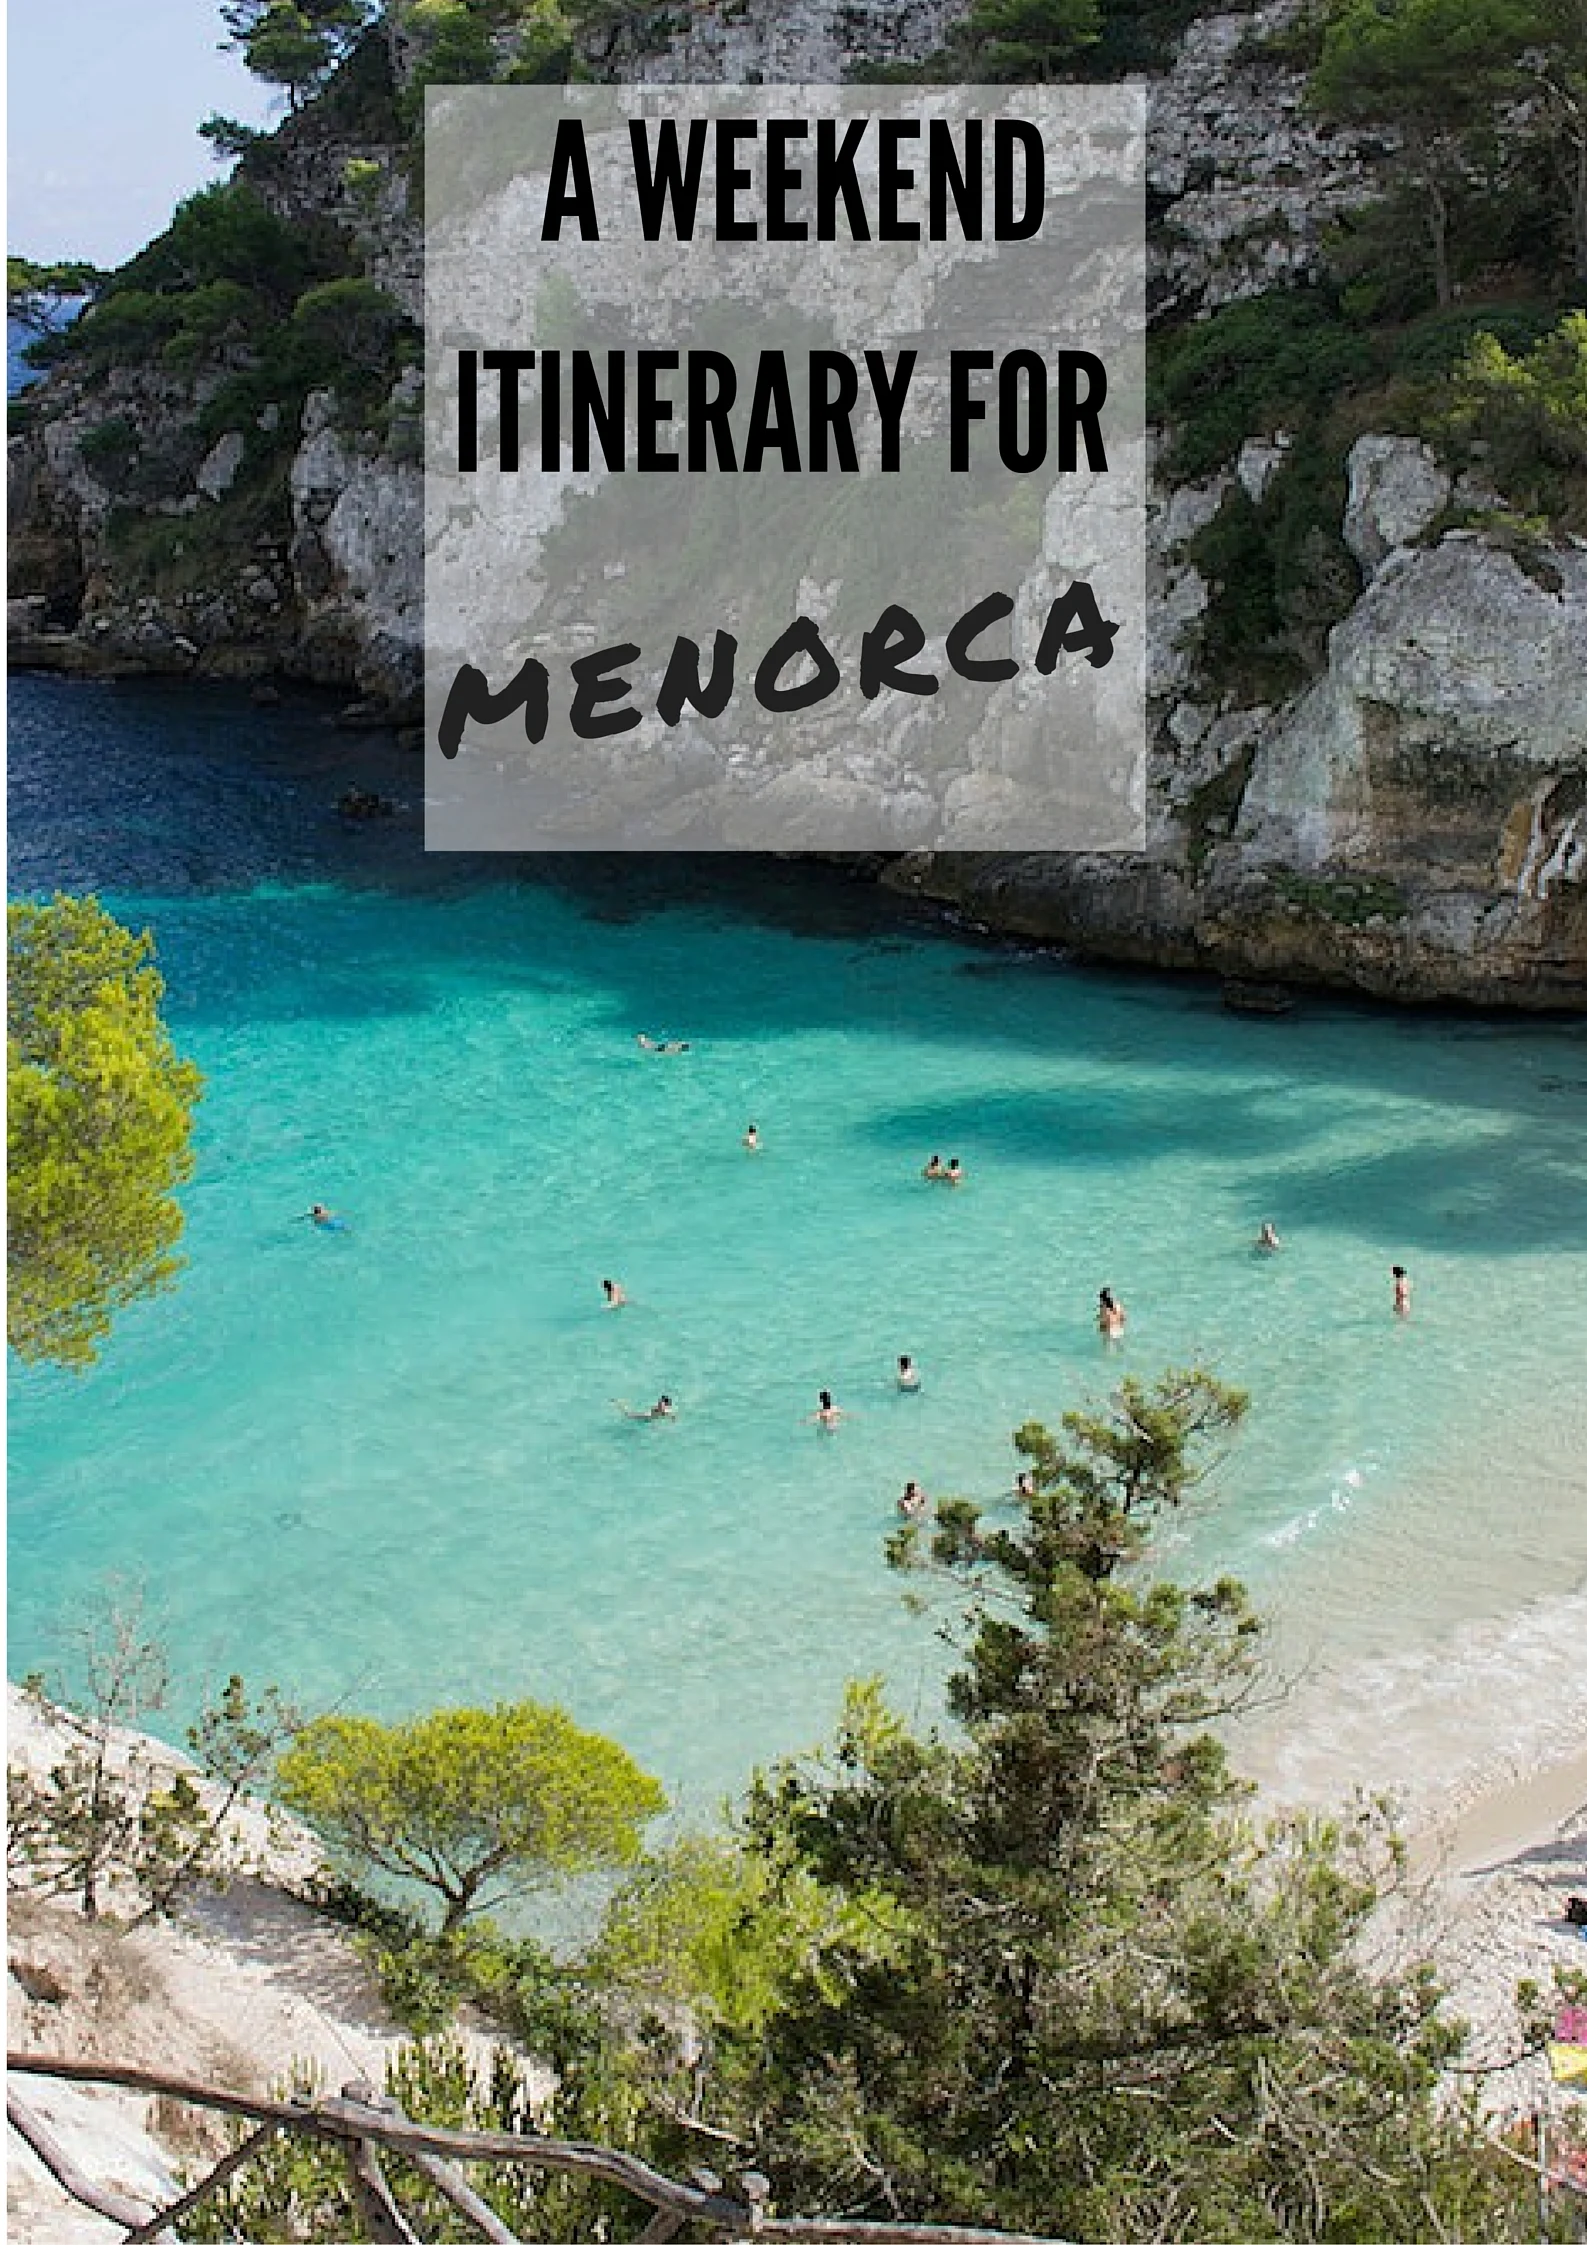 Weekend itinerary for Menorca on The Travel Hack